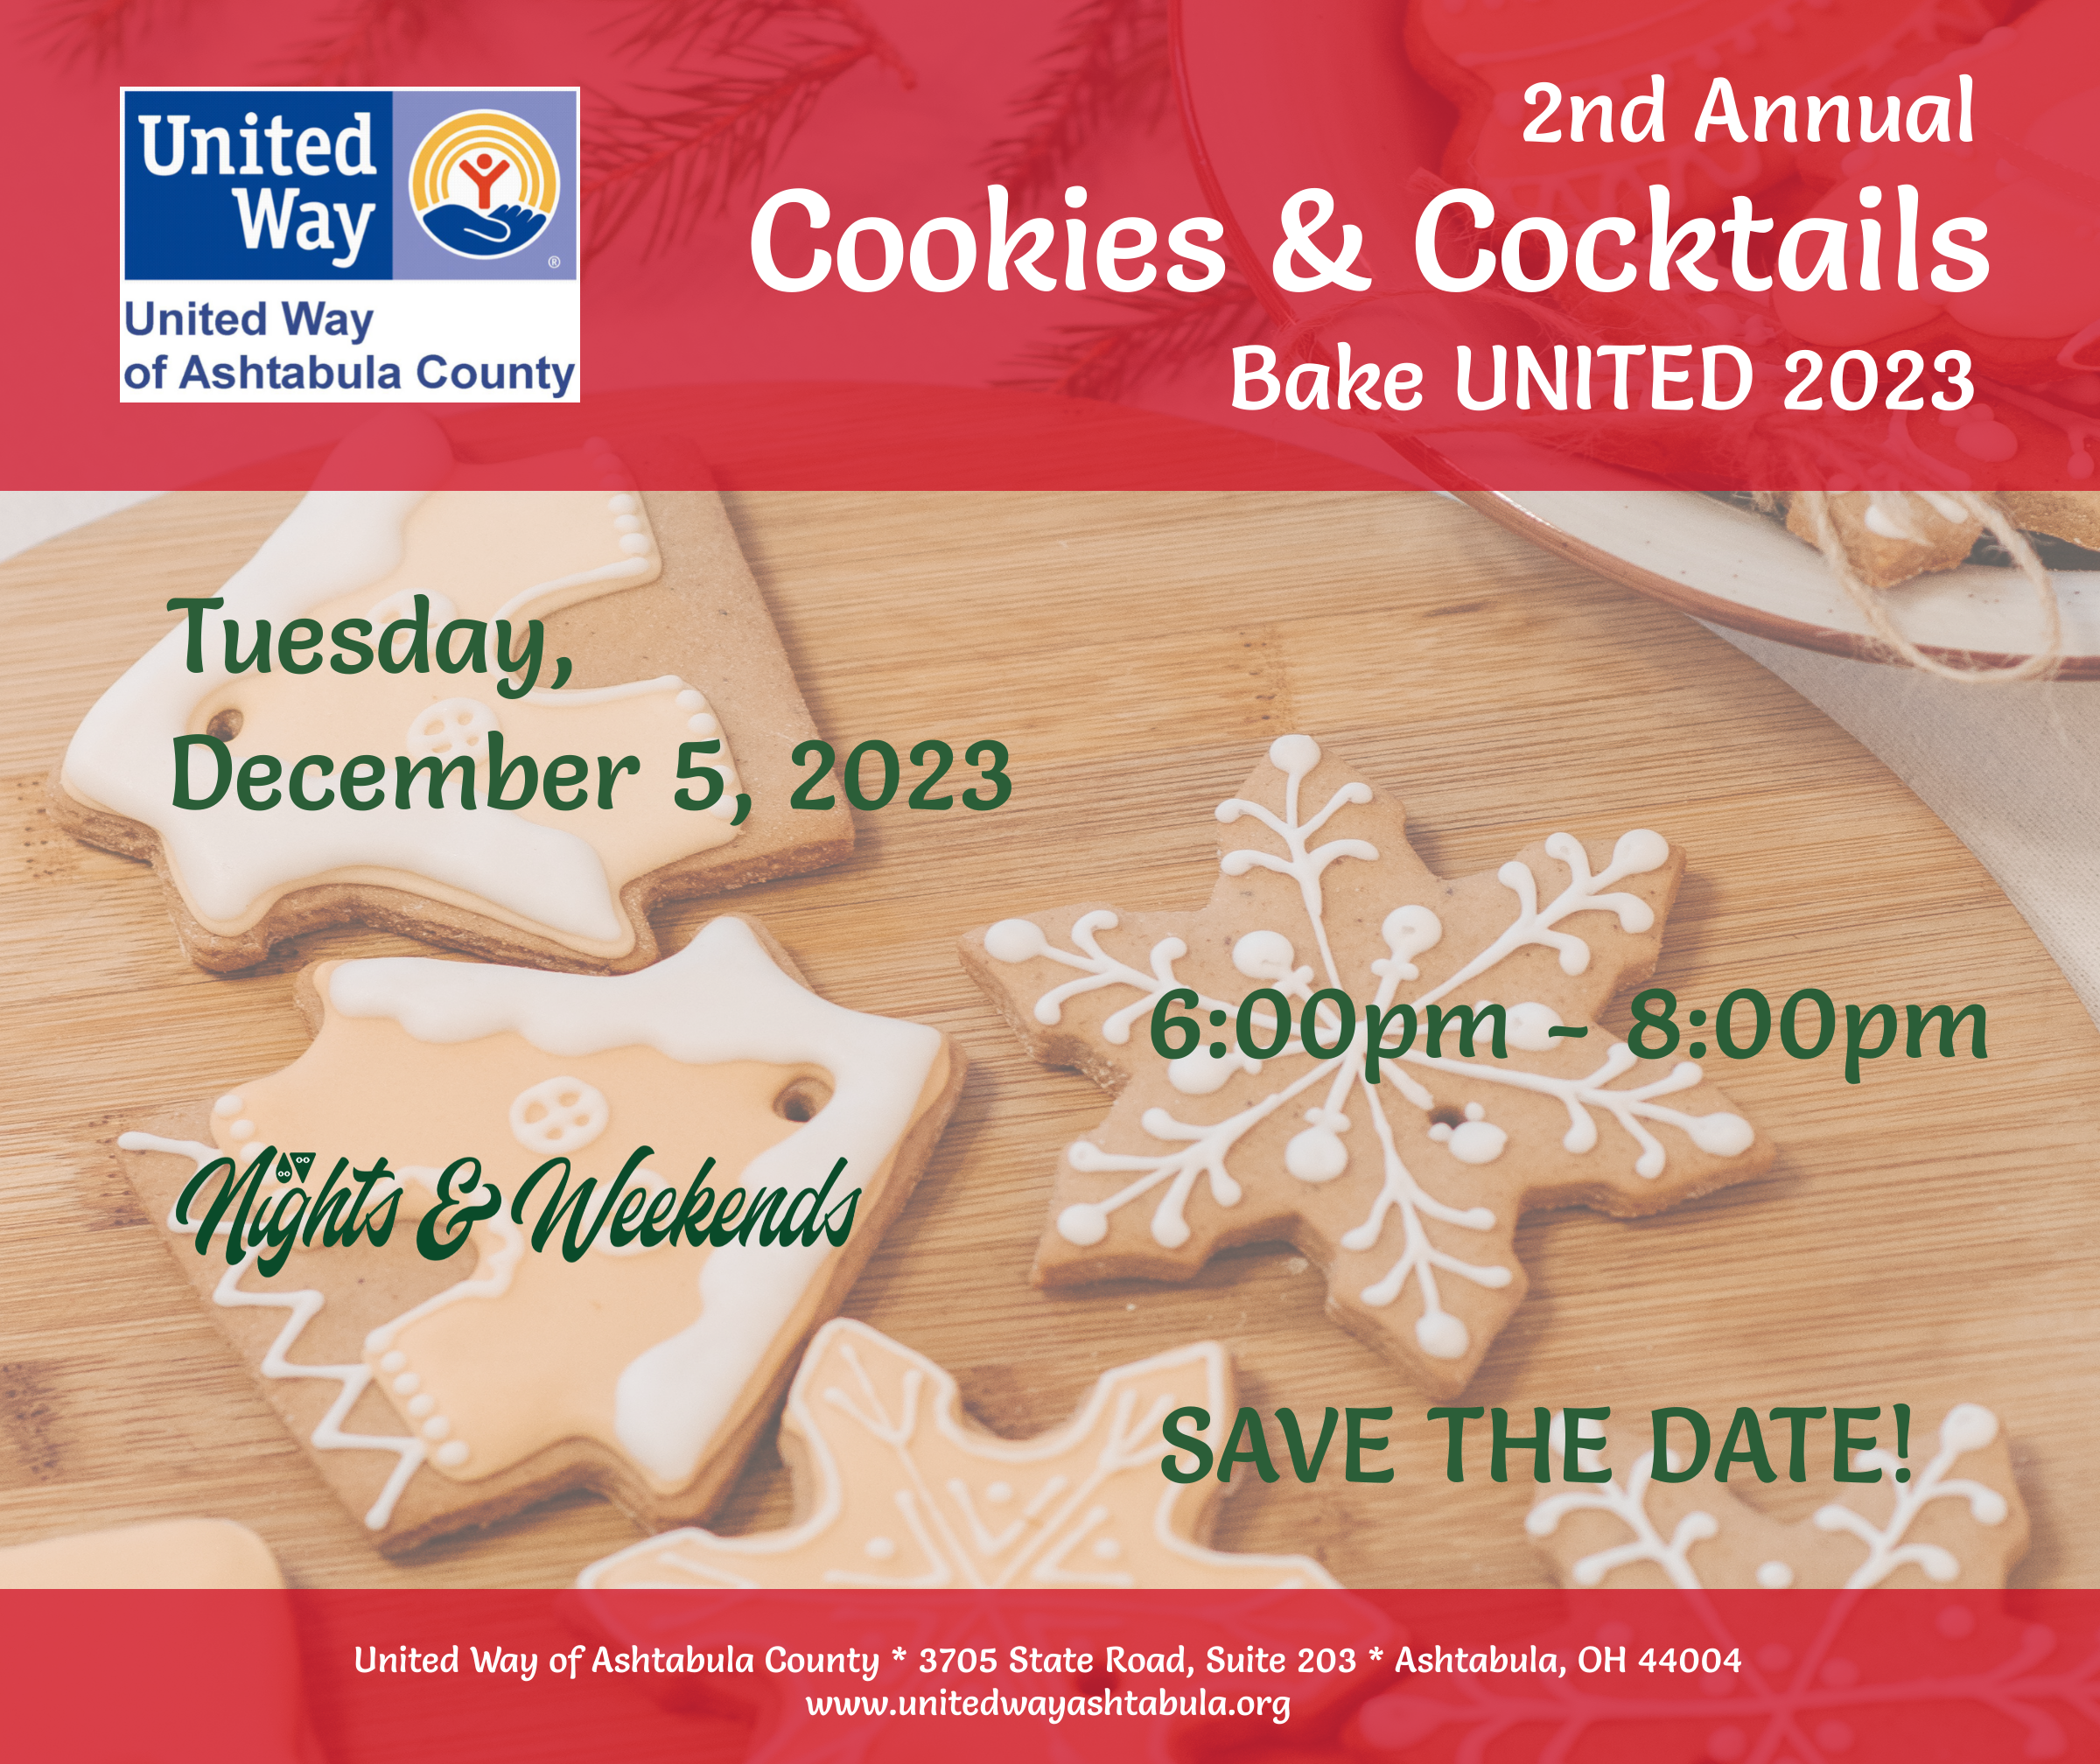 cookies & Cocktails 2nd annual save the date